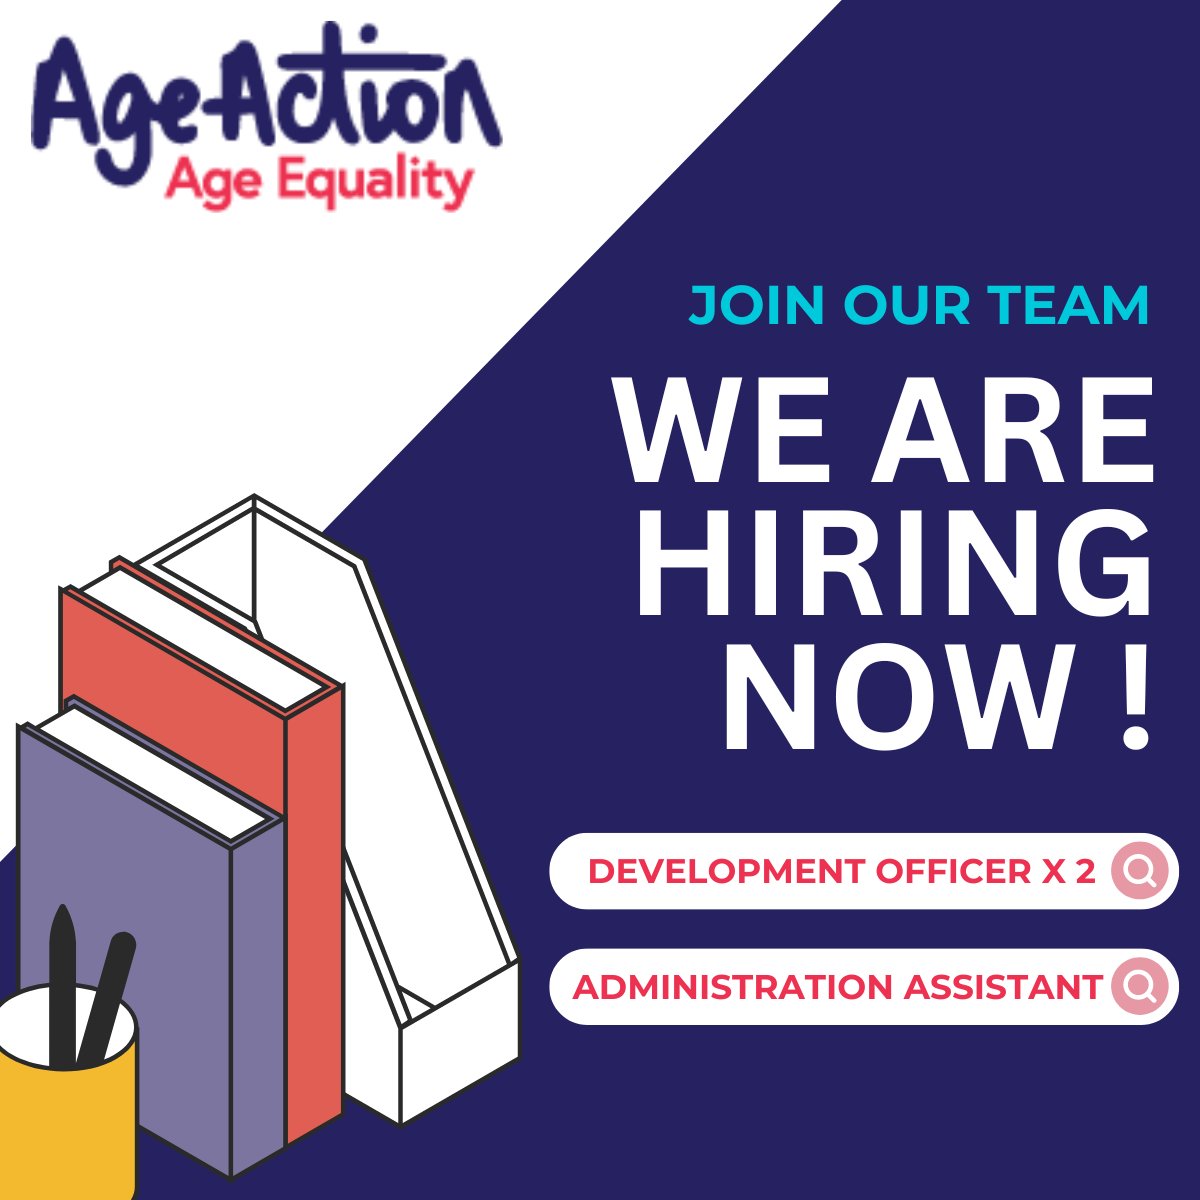 We are hiring! We are looking for 3 new people to join our team.

2 x Development officers in Dublin & Galway/remote. ageaction.ie/about-us/staff…

Administration Assistant in Cork.
ageaction.ie/about-us/staff…

#jobfairy #jobfairydublin #jobfairycork #jobfairygalway #hiring